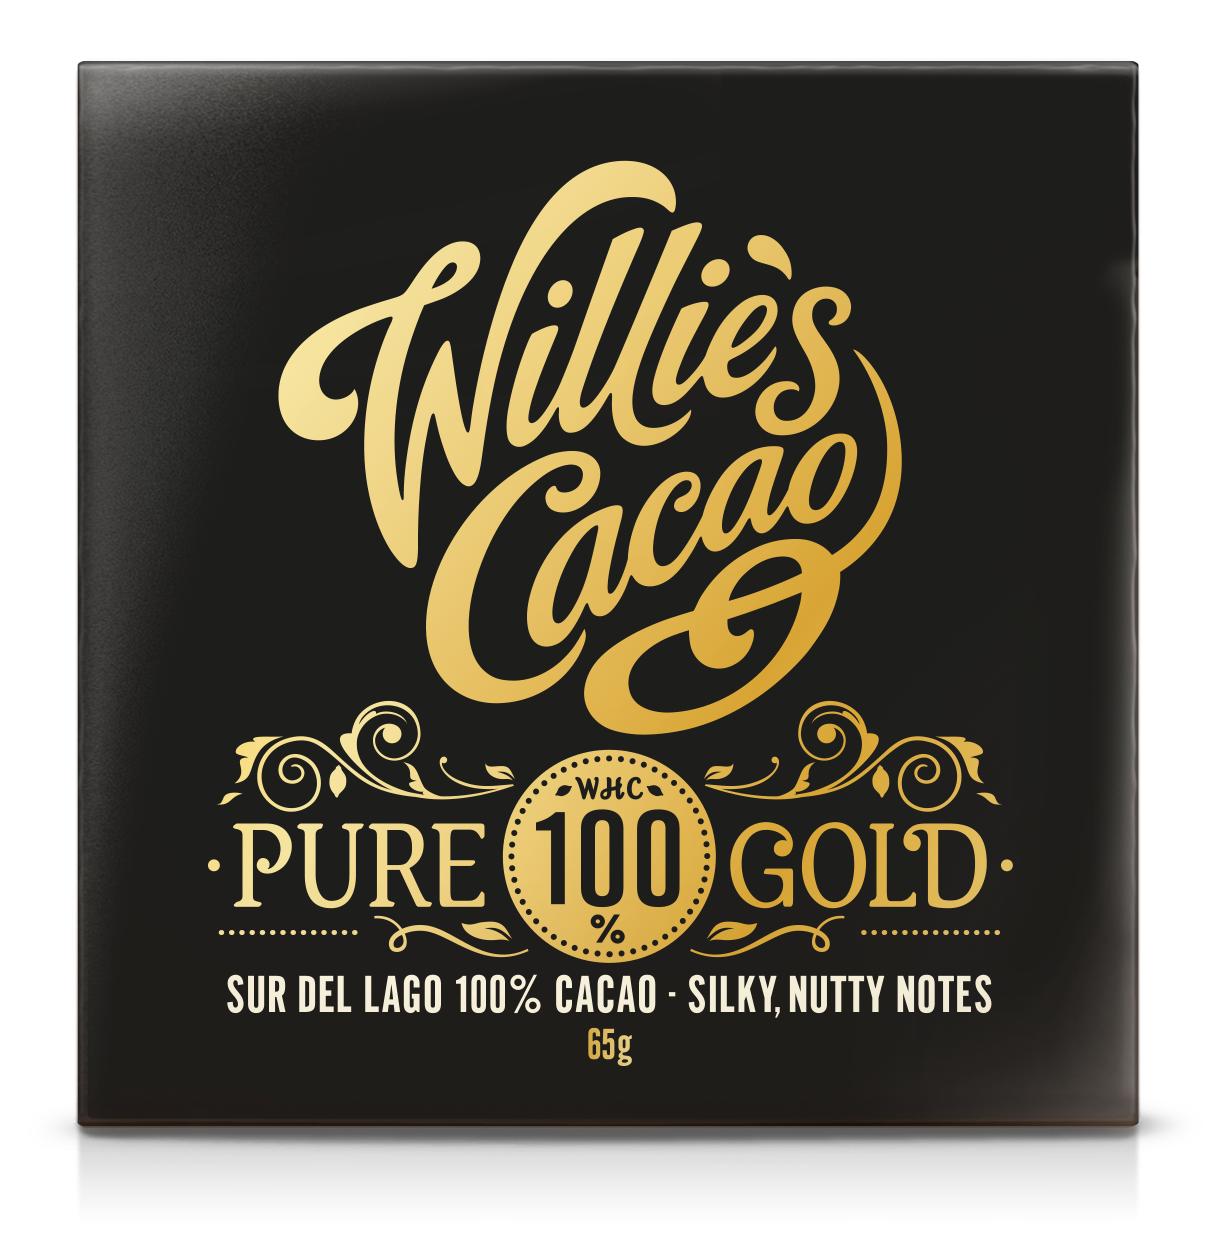 Willie's Cacao Pure Gold Sur Del Lago 100% Cacao Bar